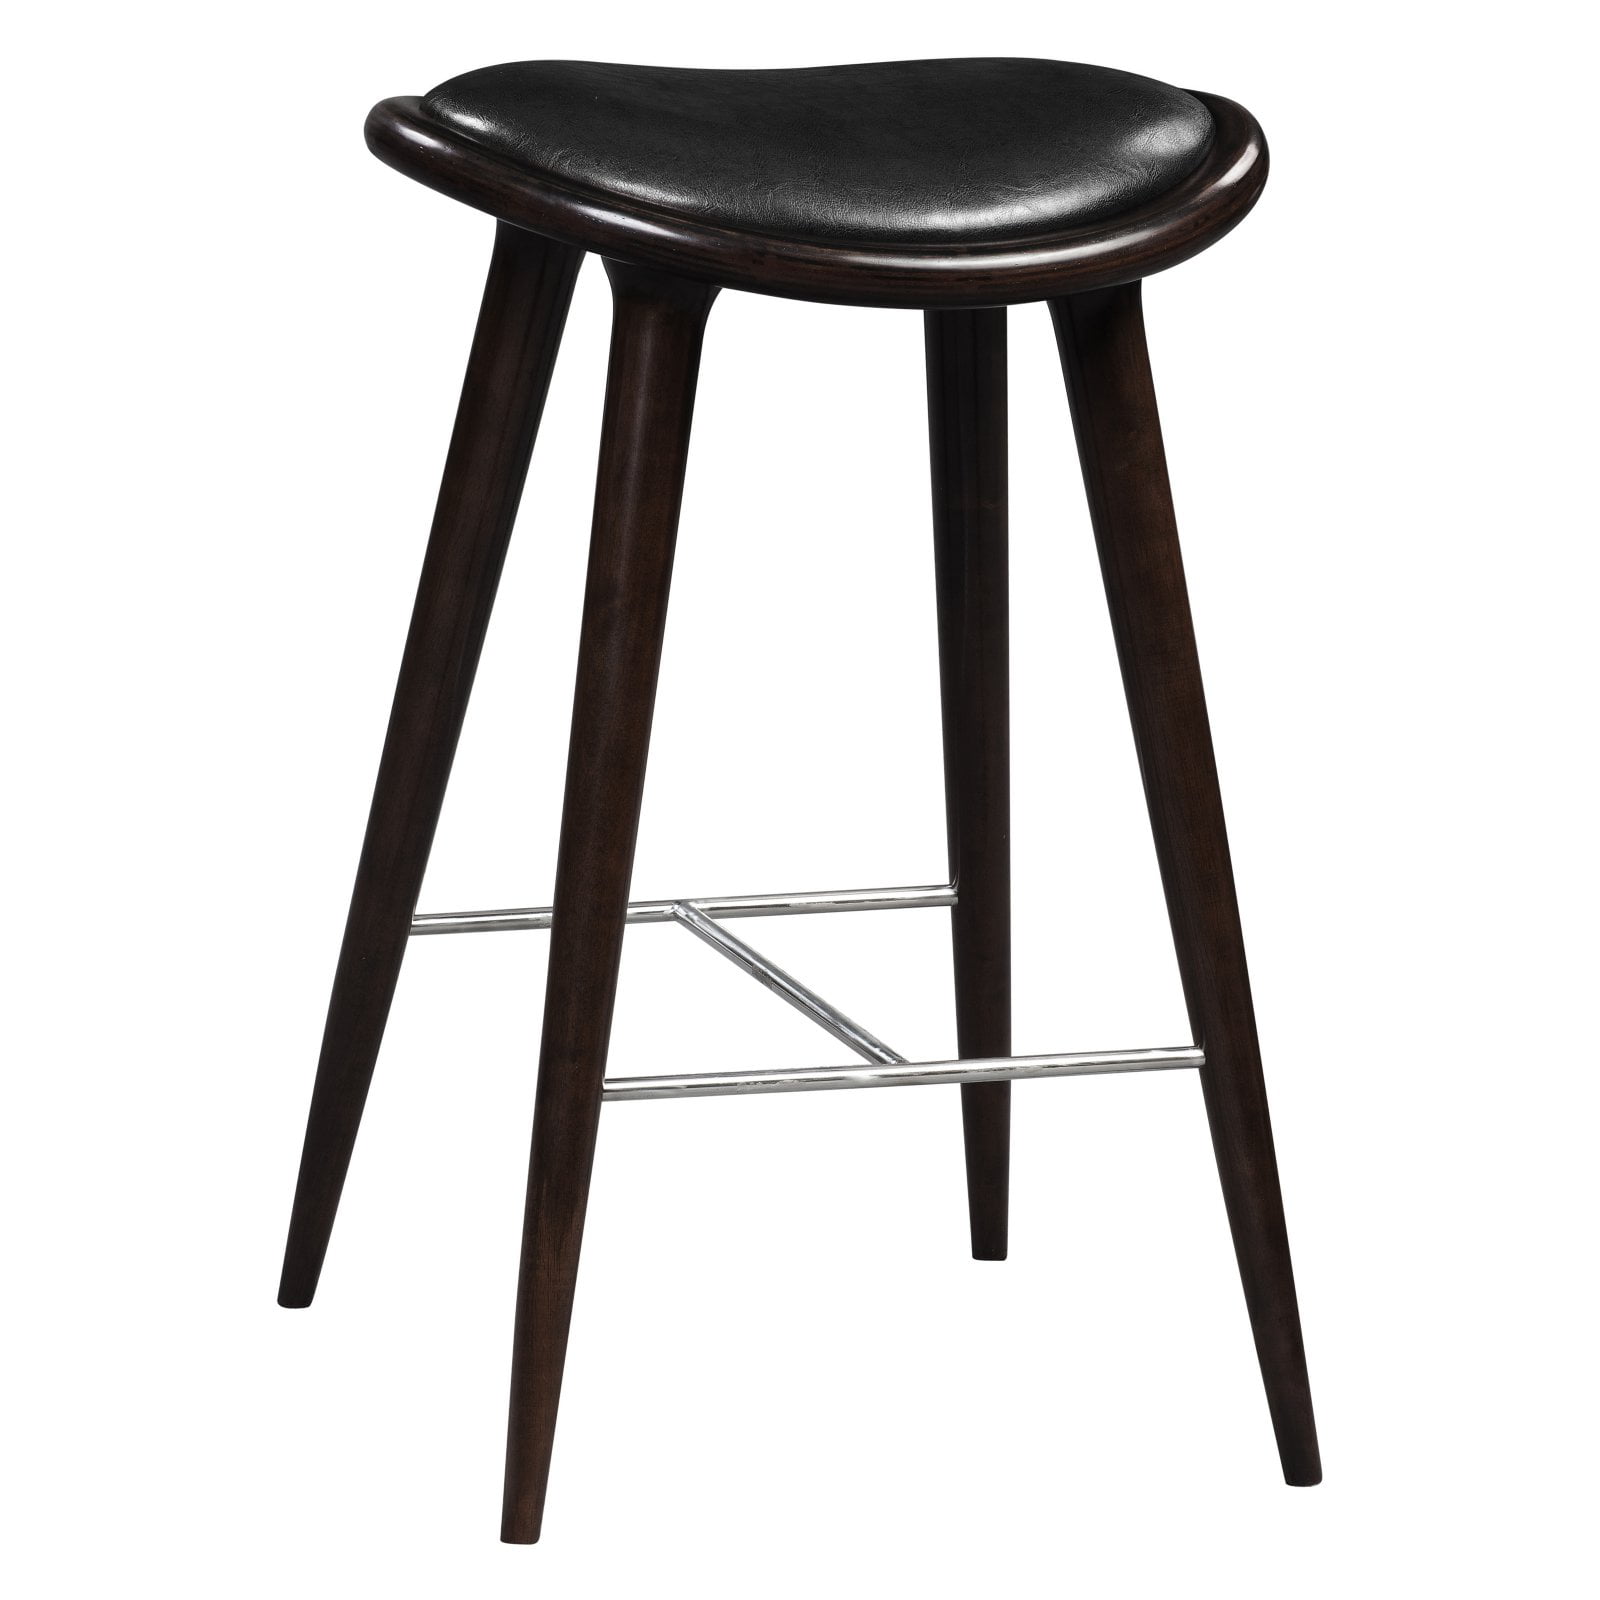 57129 29 In. Lucio Oval Stool With Black Upholstered Seat, Cappuccino